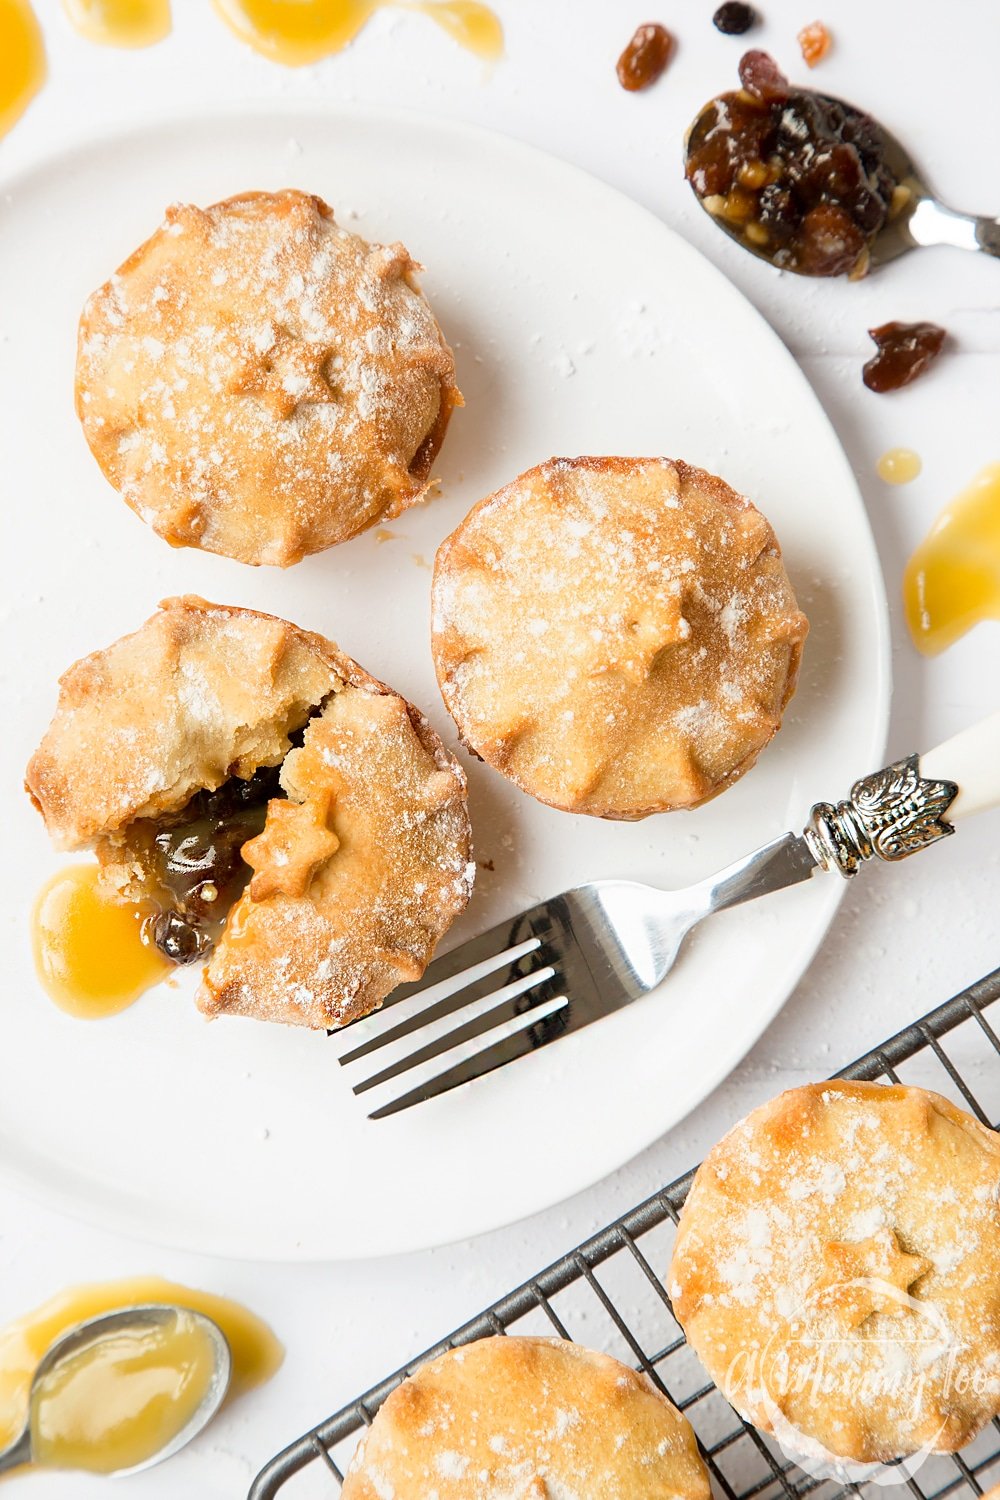 Delicious salted caramel mince pies served on a plate, alongside salted caramel sauce